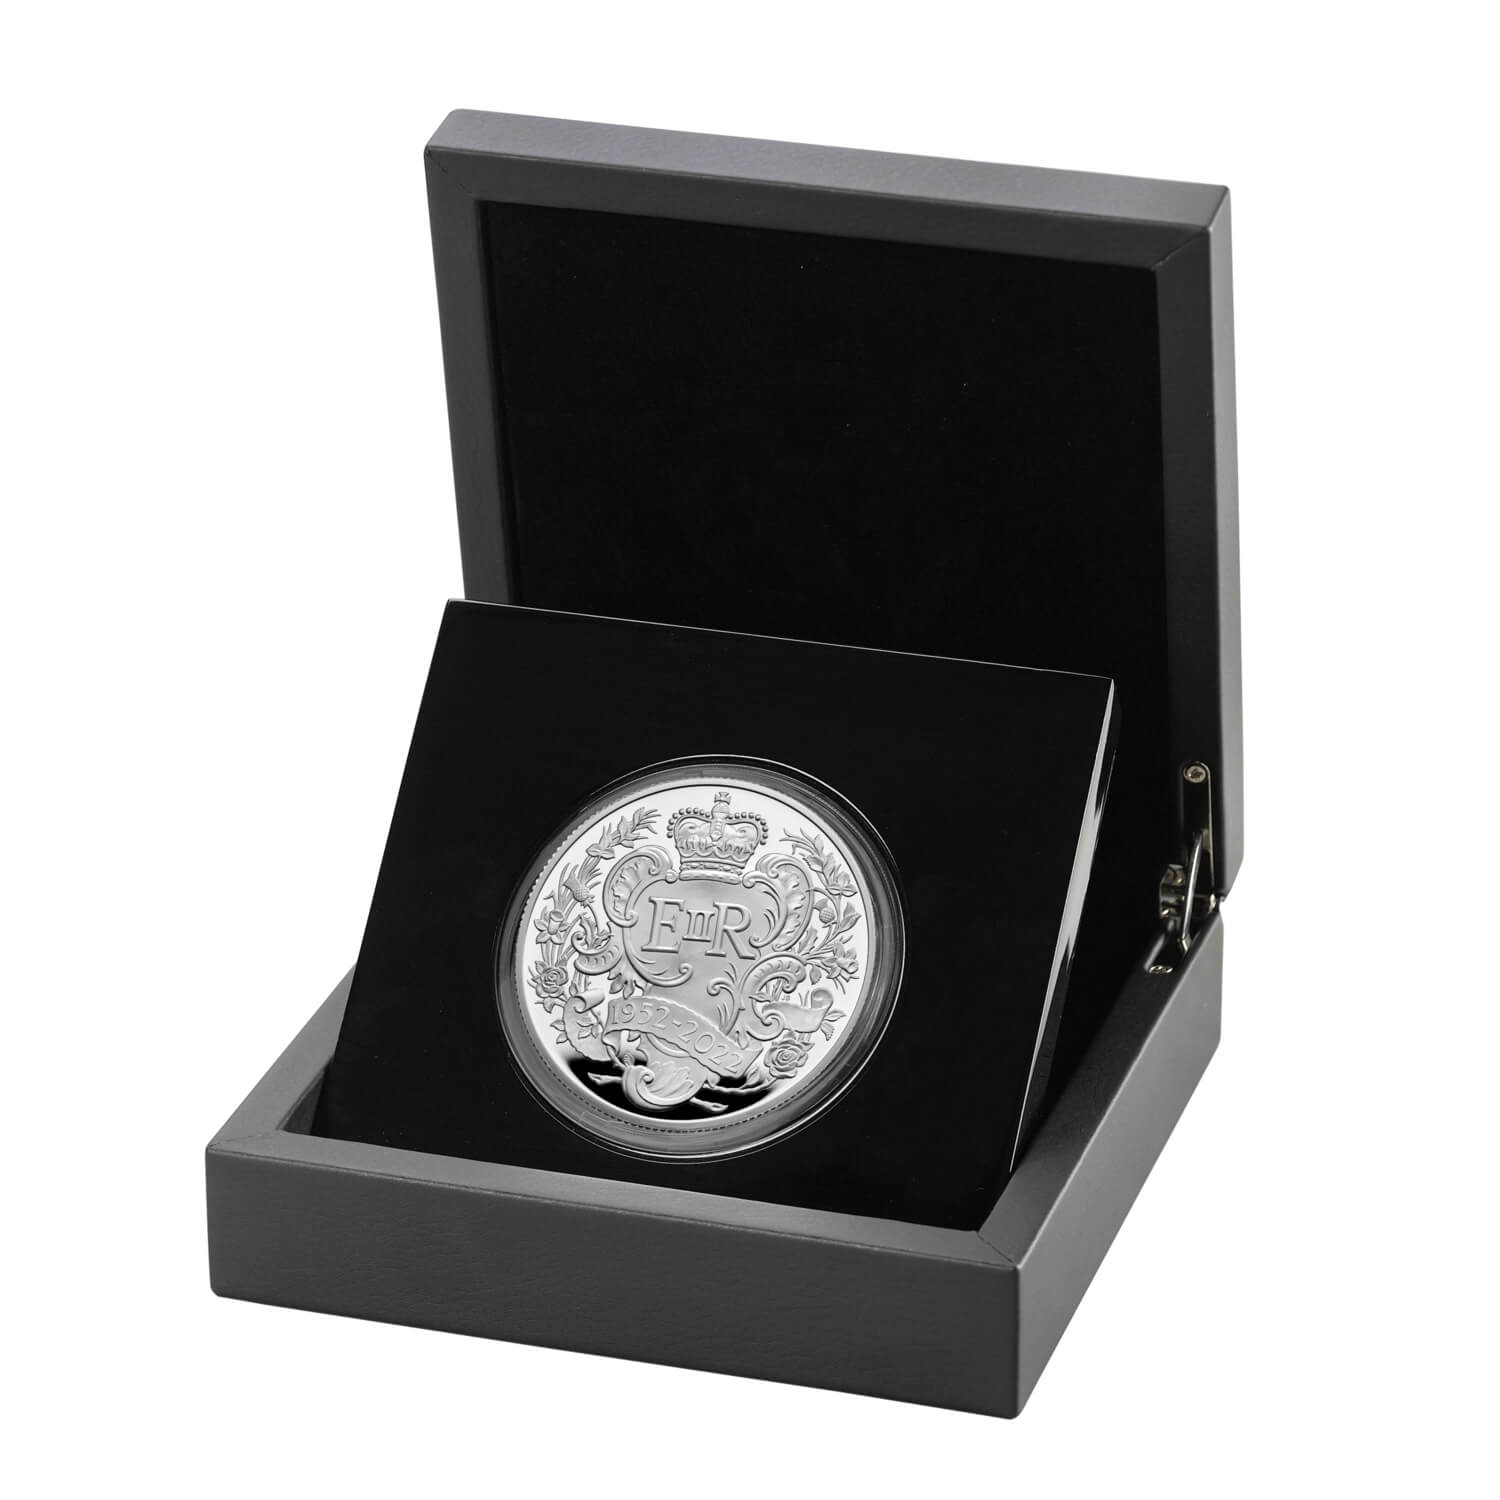 2022 UK Platinum Jubilee of Her Majesty The Queen Silver Proof 50p Coin 